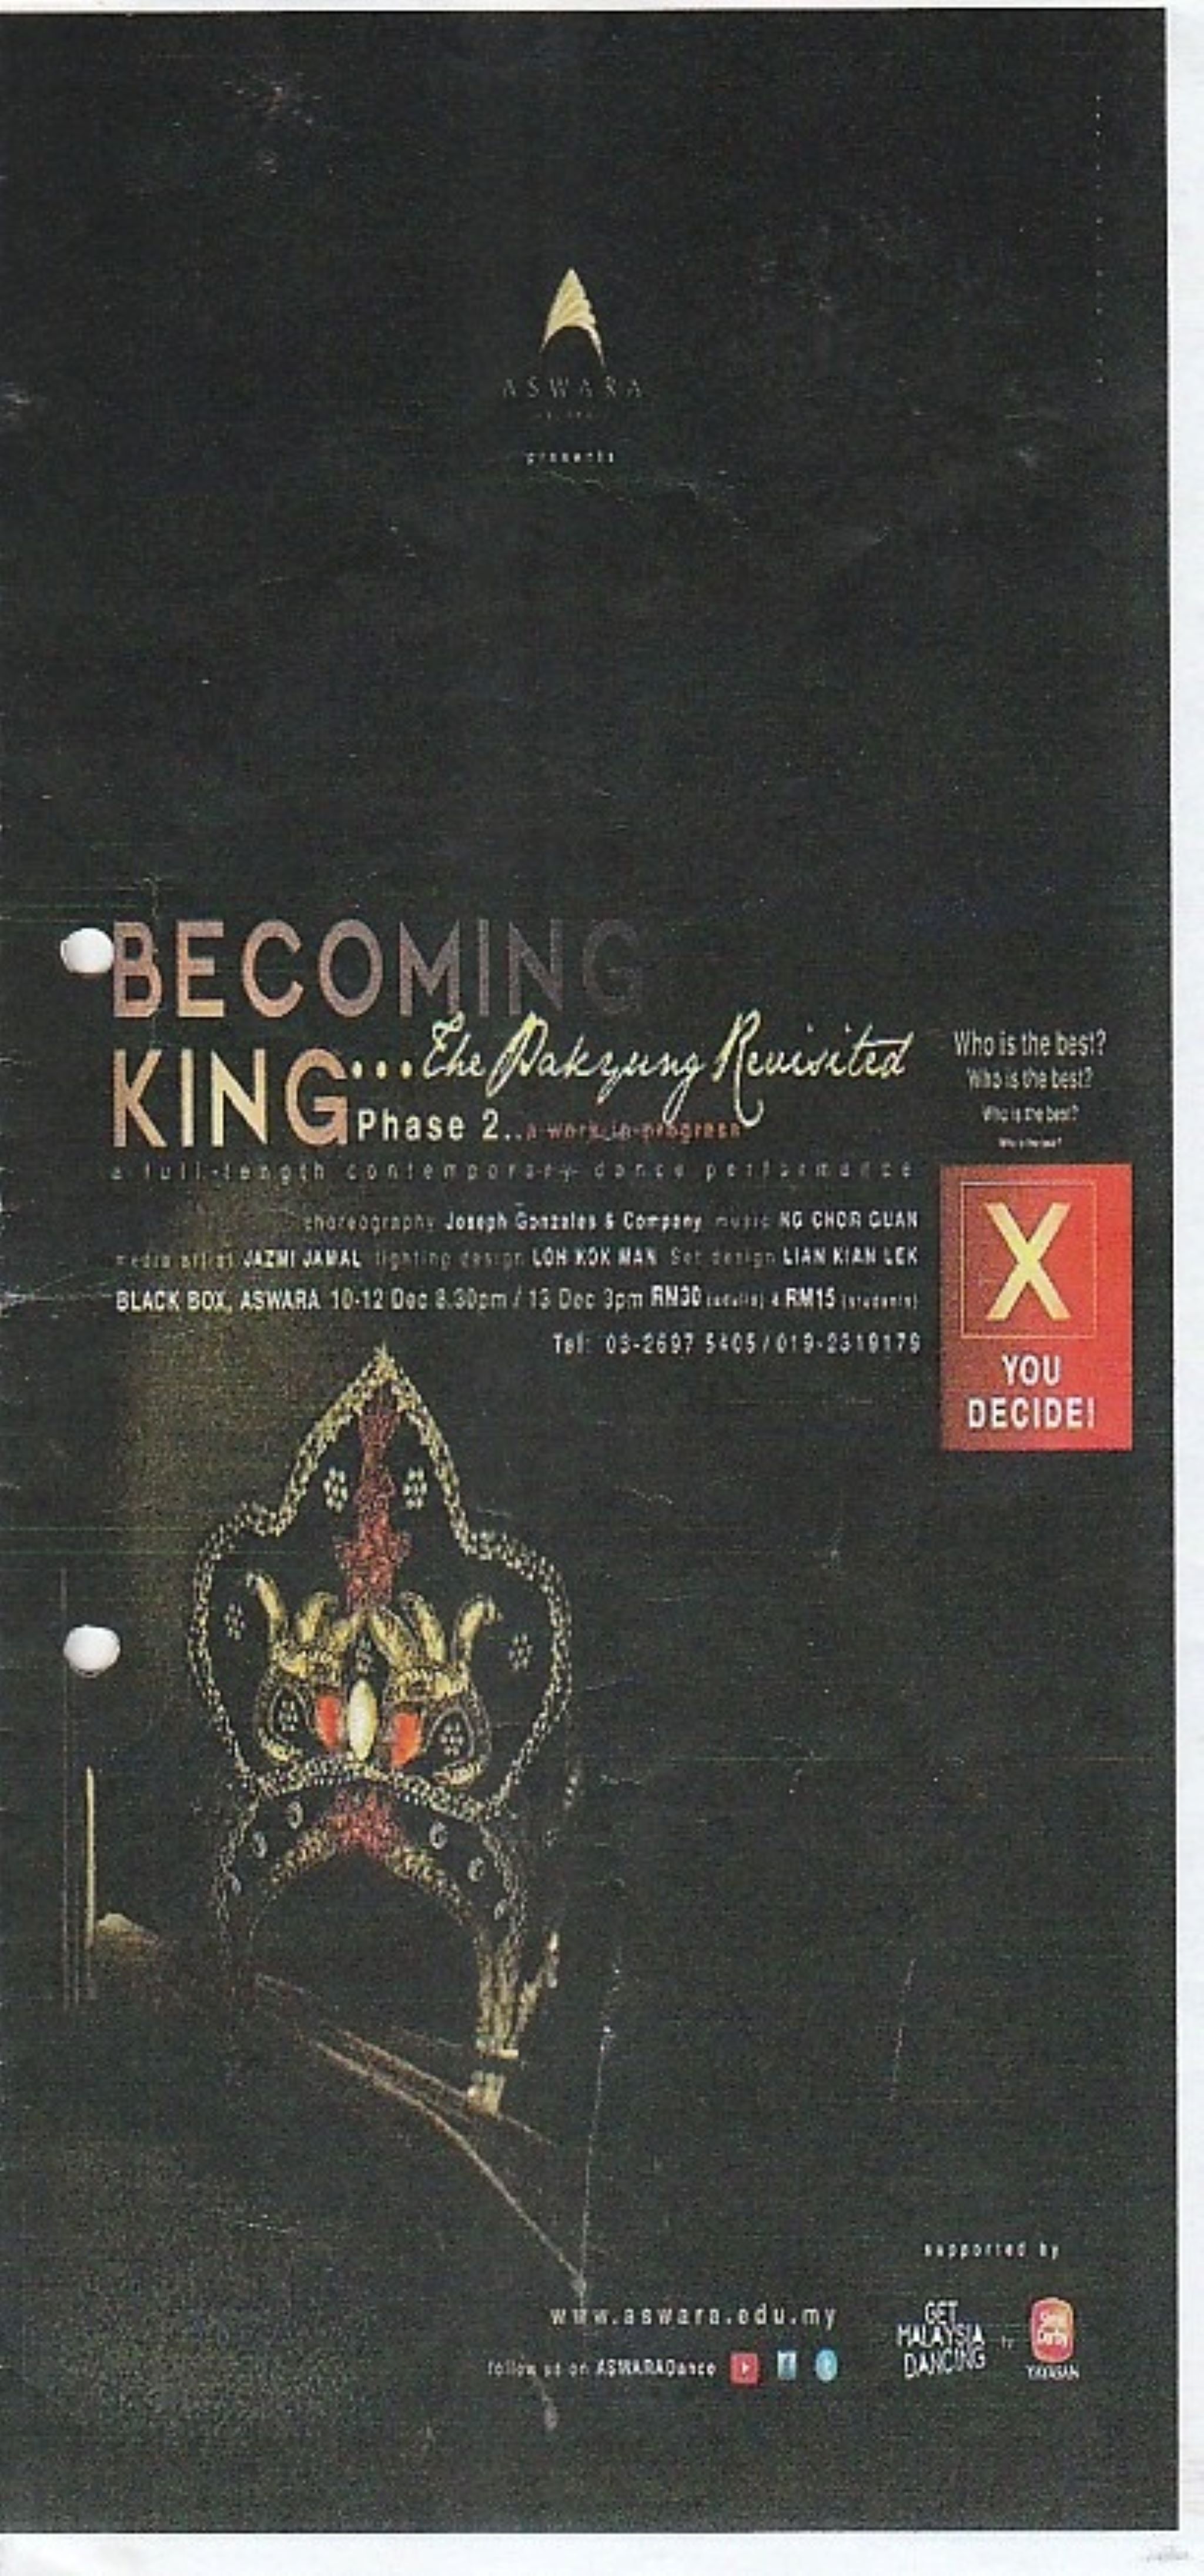 2015 Becoming King Cover